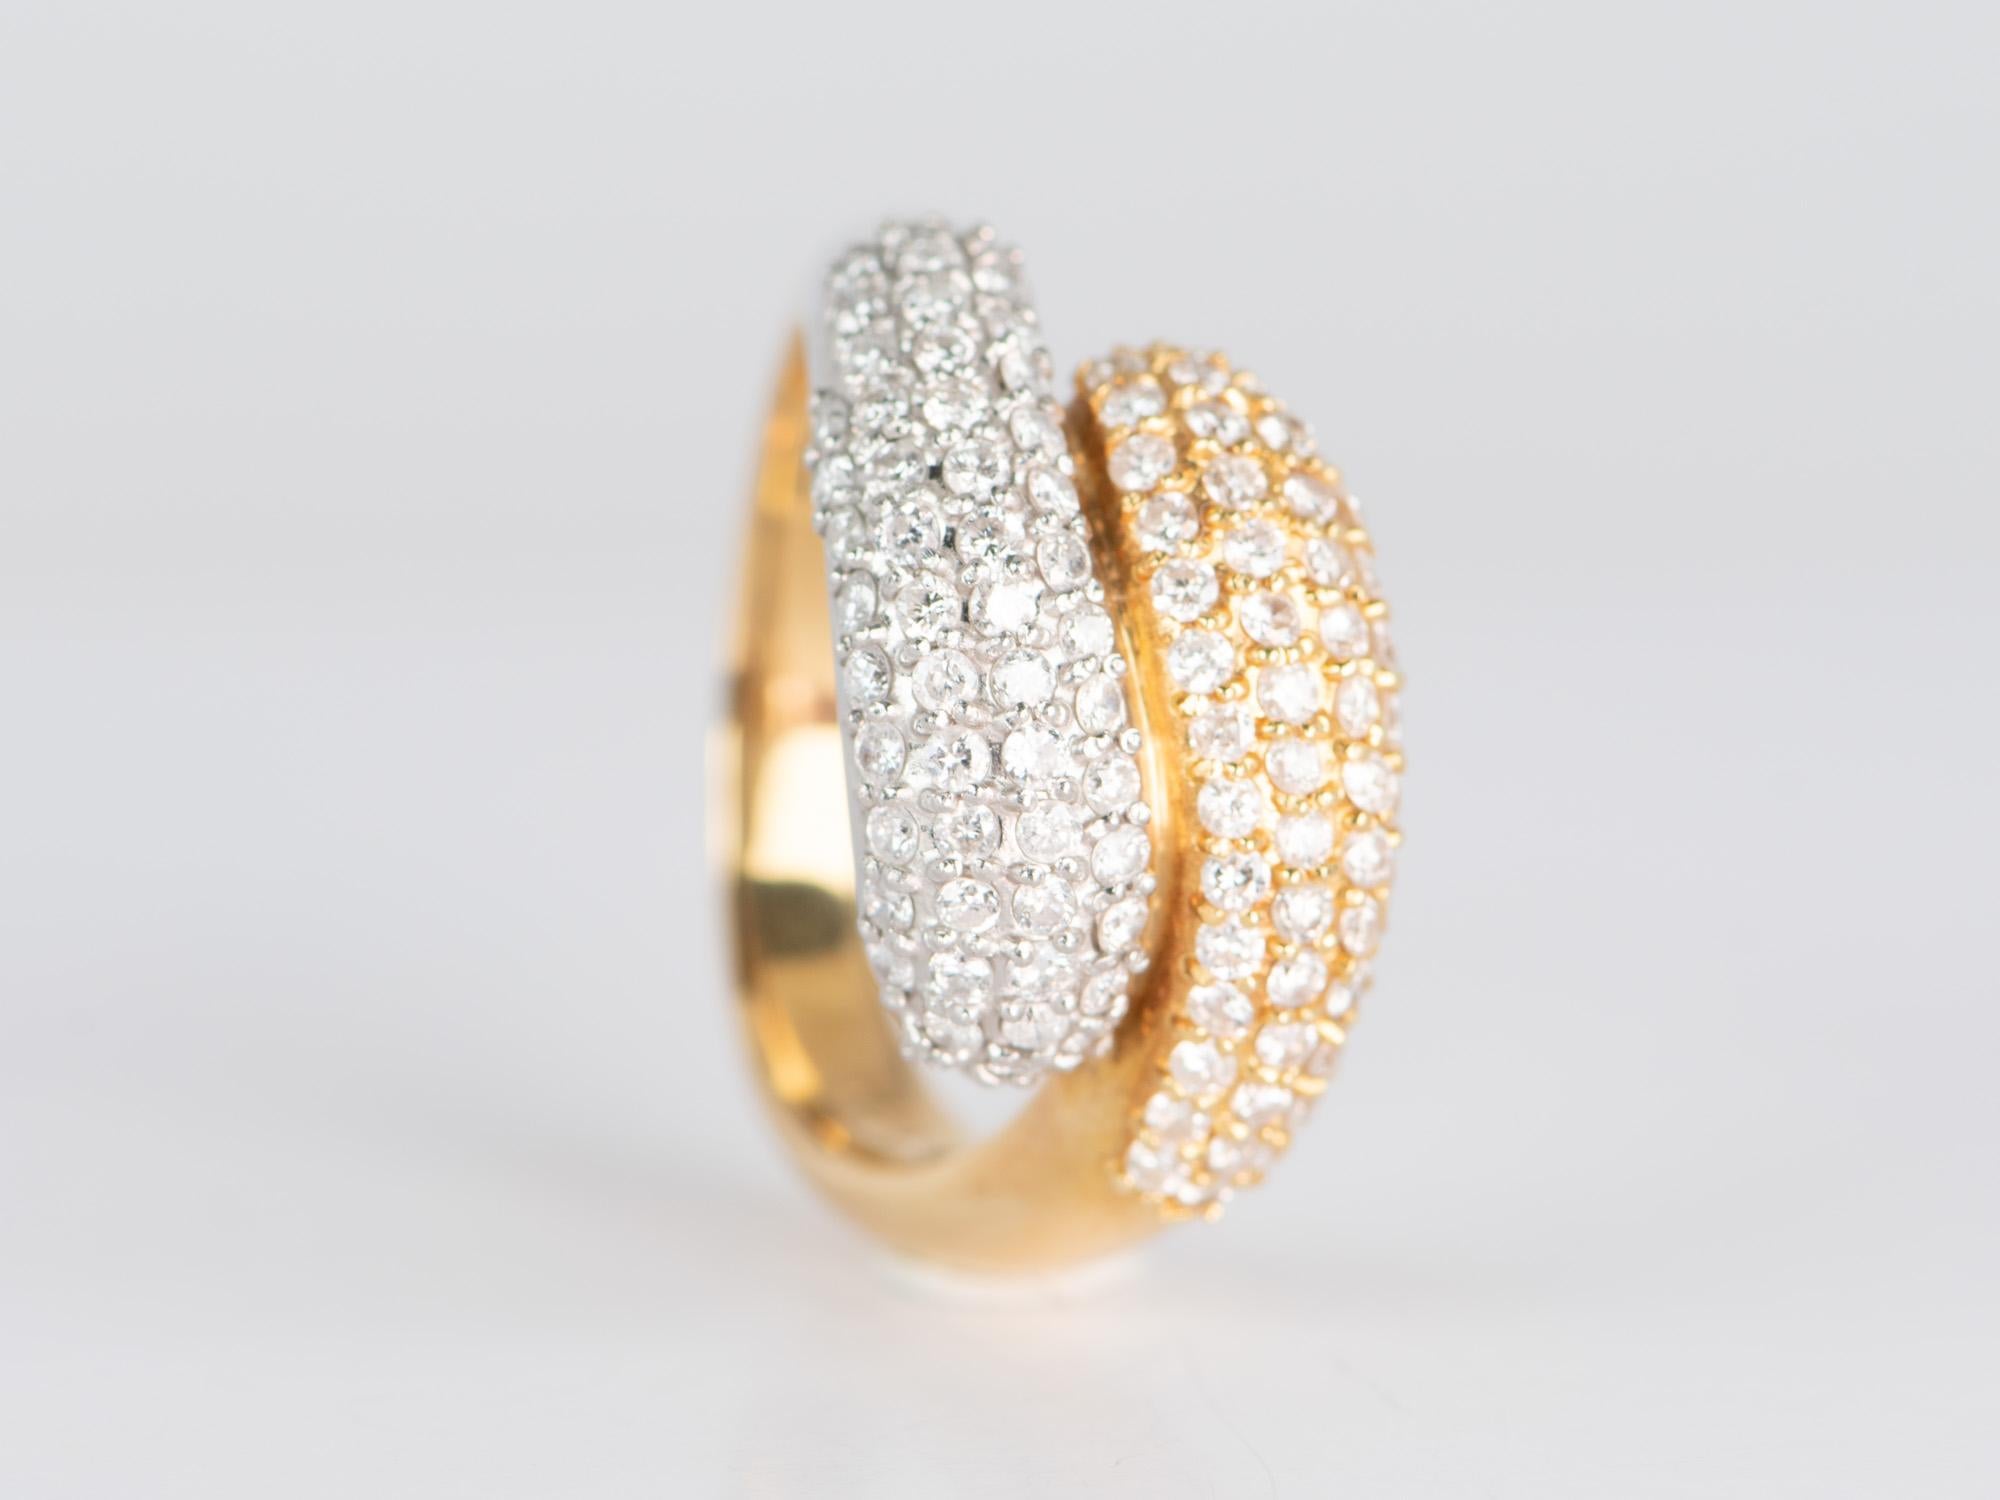 18K Gold & PT950 Diamond Pave Double Head Snake Ring 8.7g 1ct Diamond R6651 For Sale 1